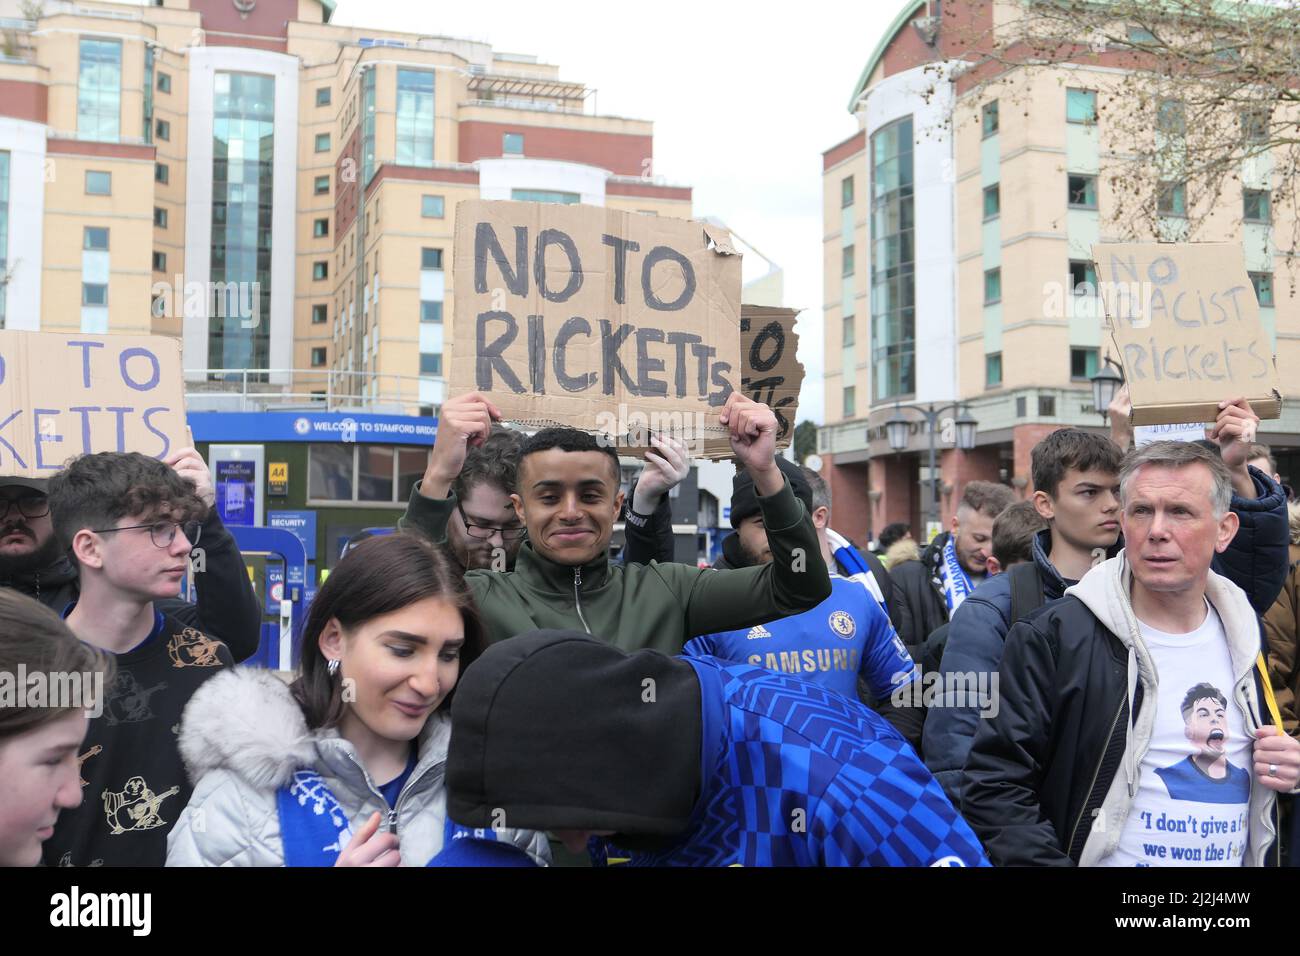 London, UK. 2nd Apr, 2022. Chelsea F.C. fans demonstrate against Ricketts family bid for their club over fears of racism Credit: Brian Minkoff/Alamy Live News Stock Photo